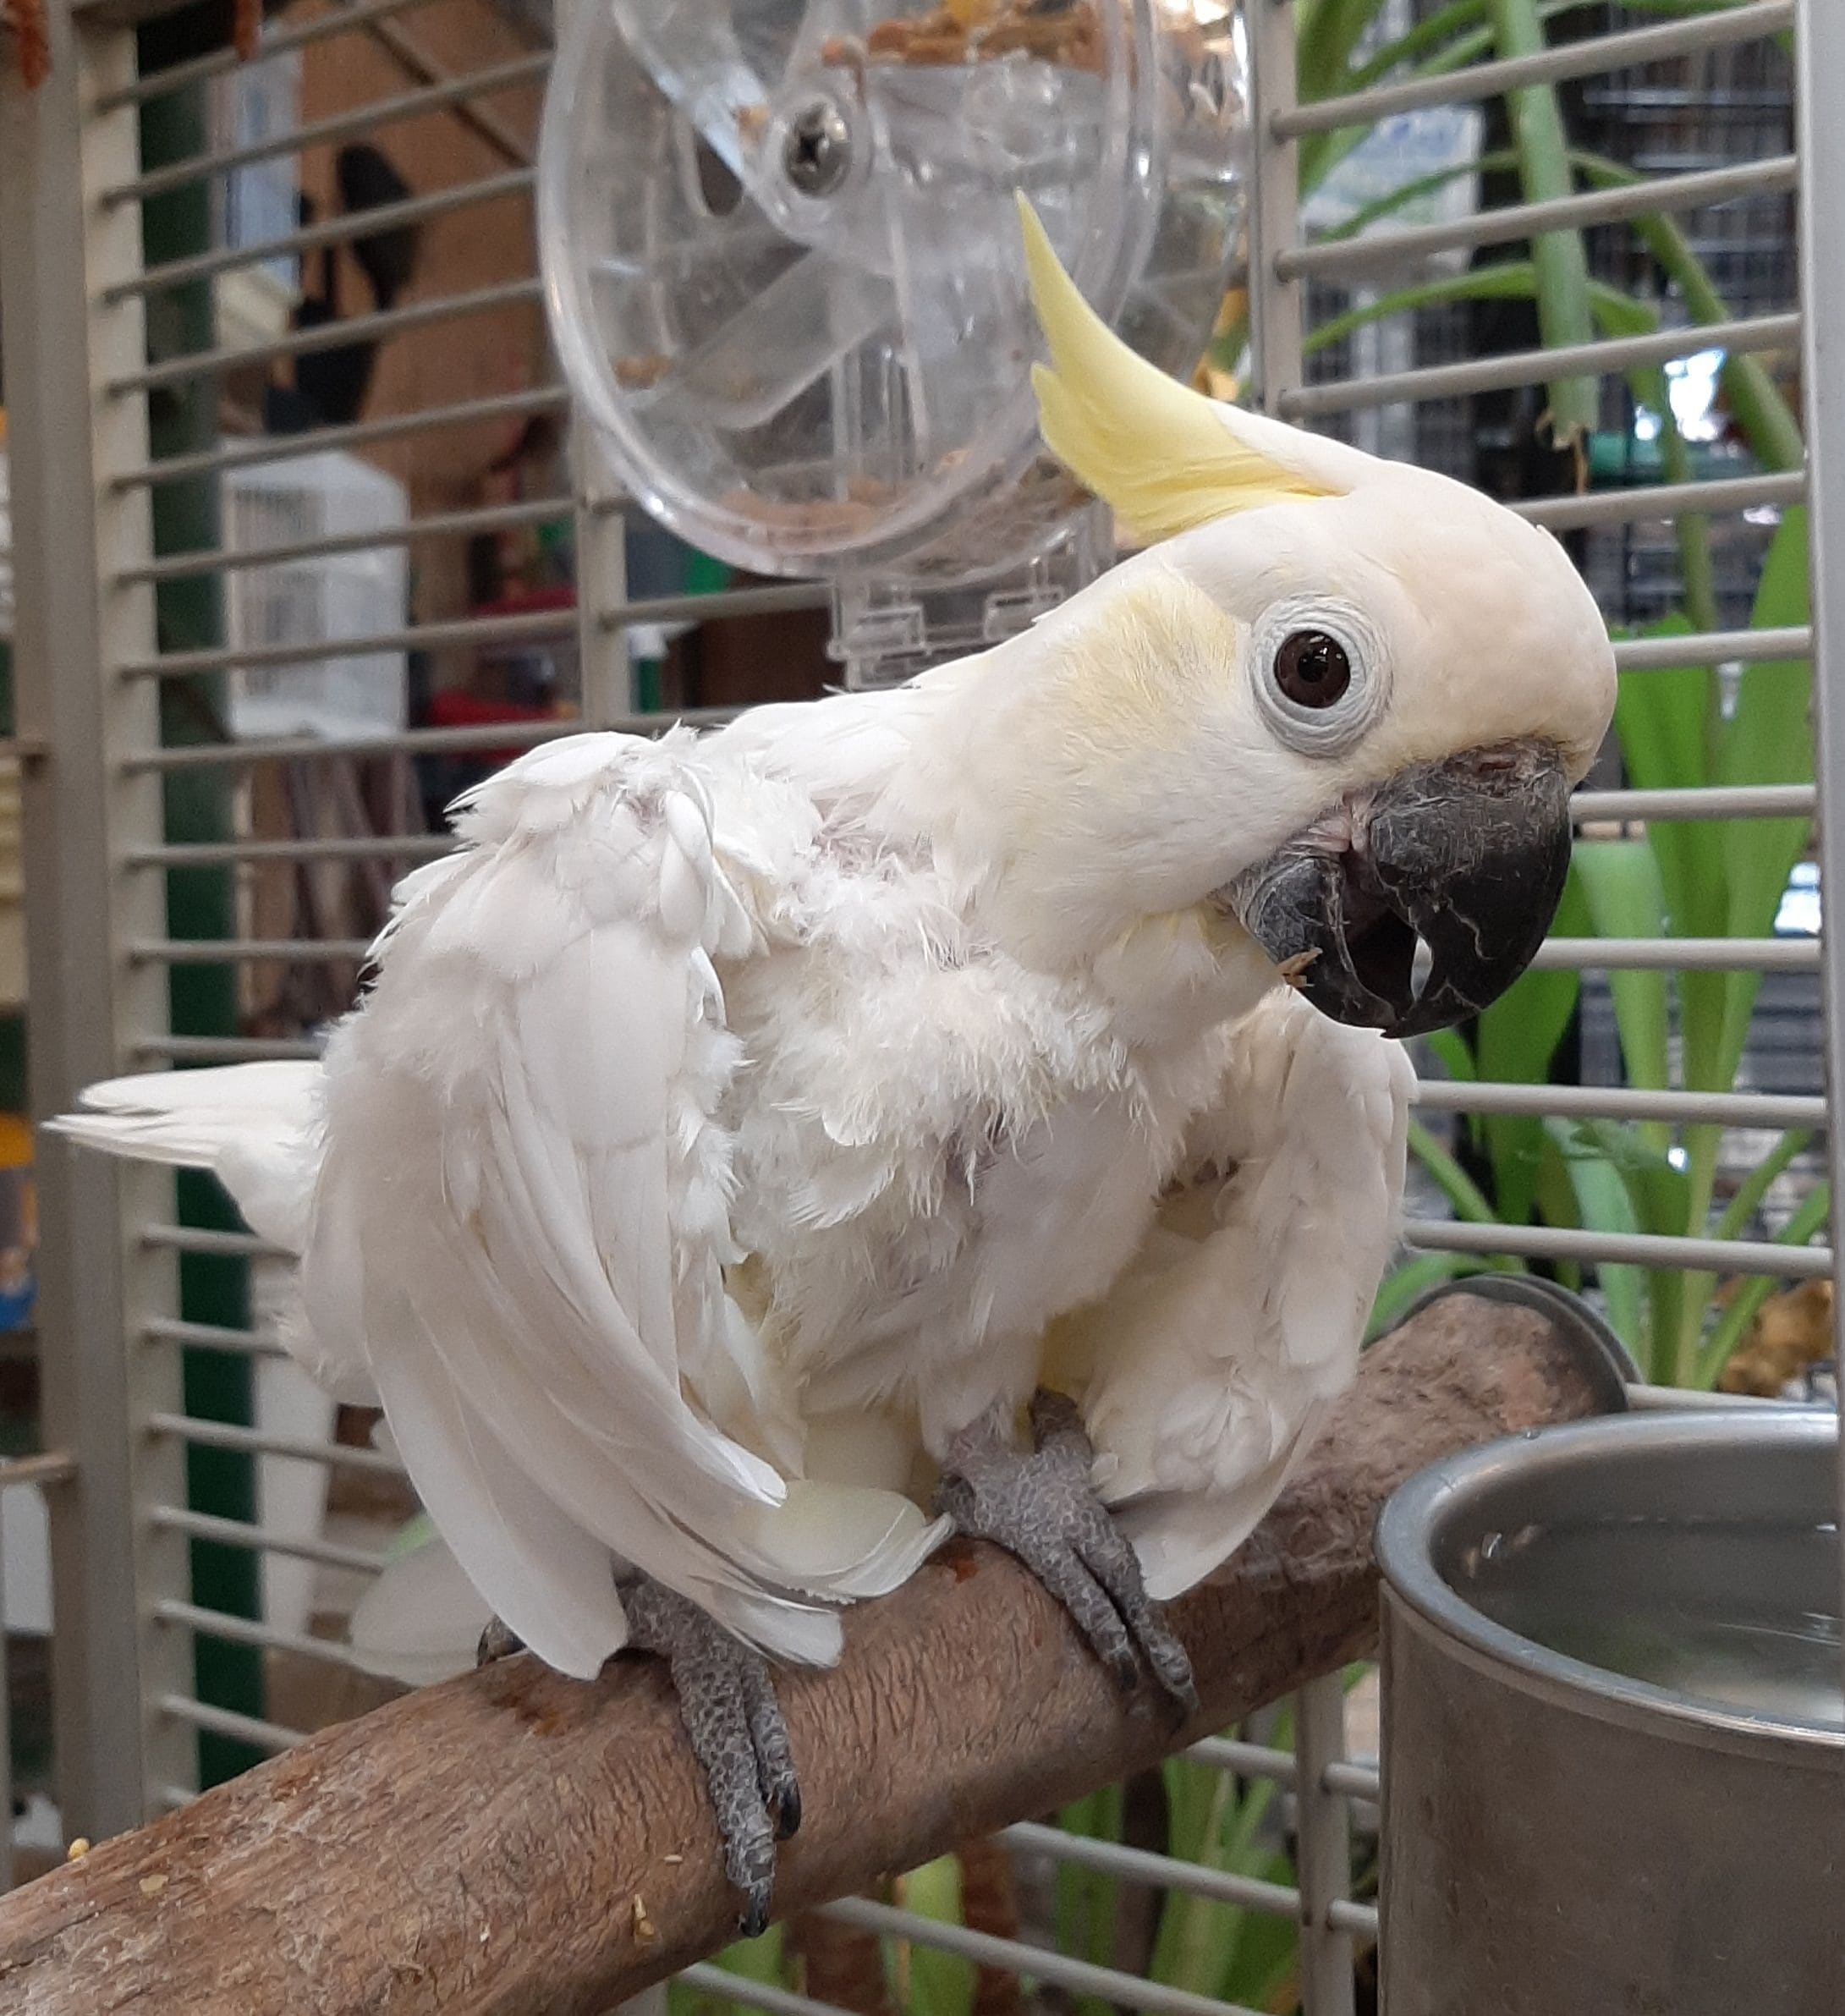 LESSER SULPHUR CRESTED COCKATOO for sale in houston texas